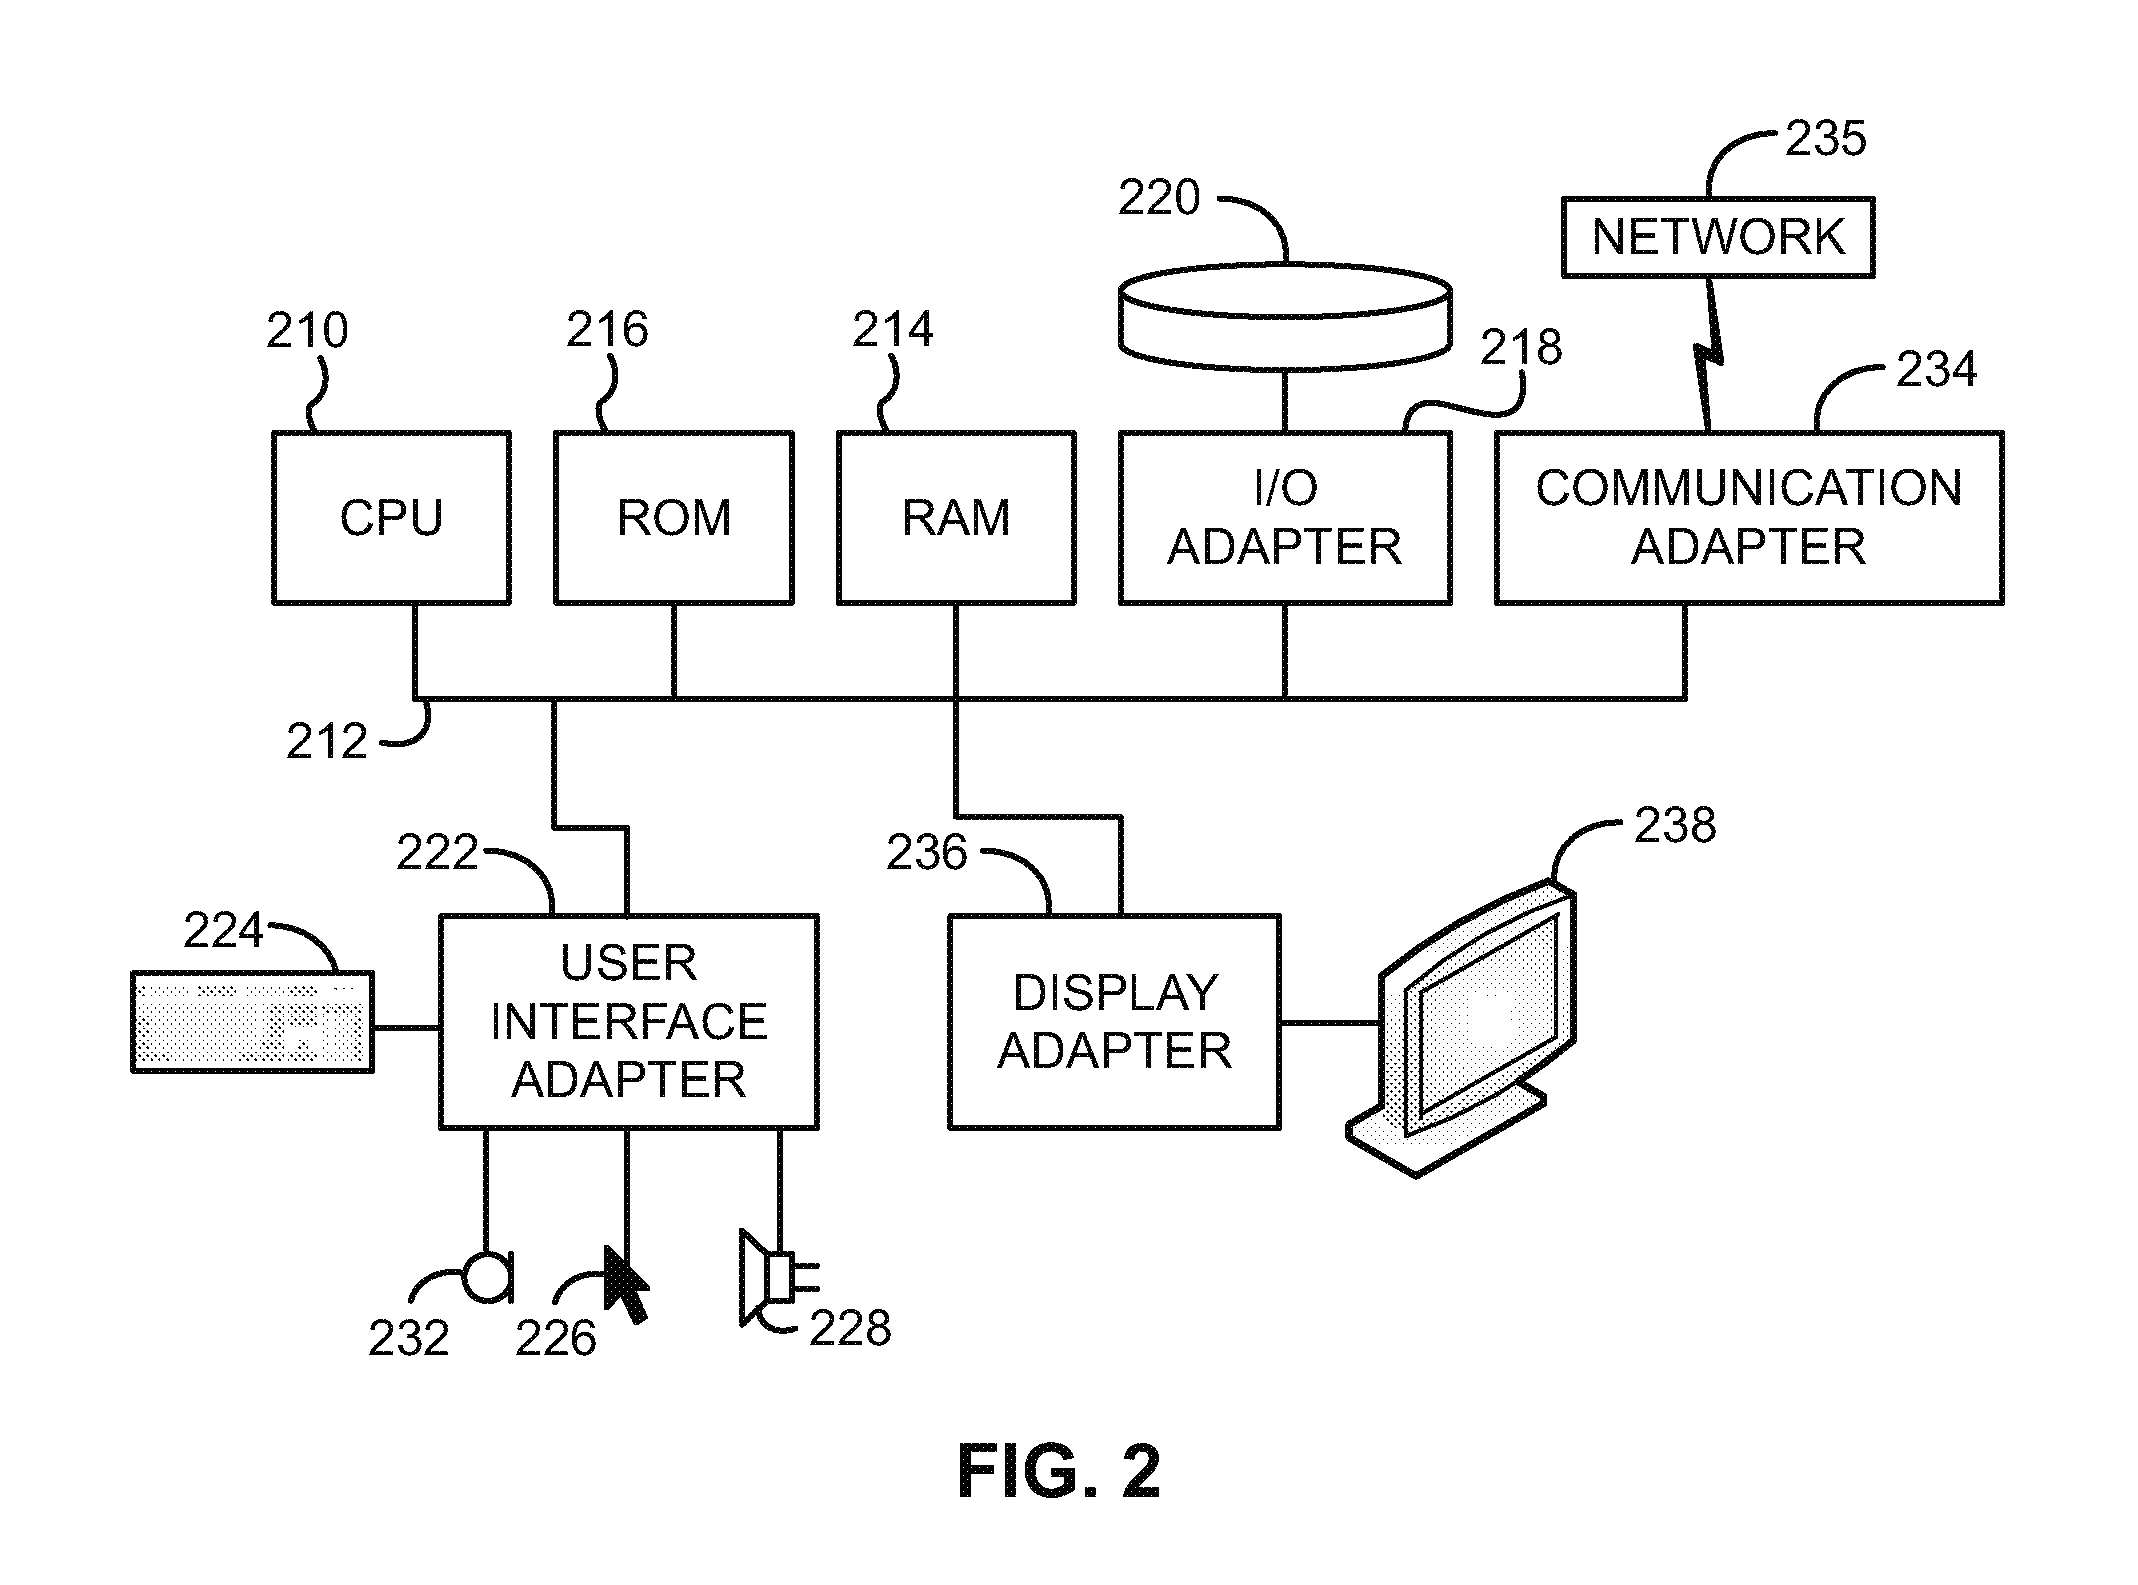 Systems and methods for mobile image capture and processing